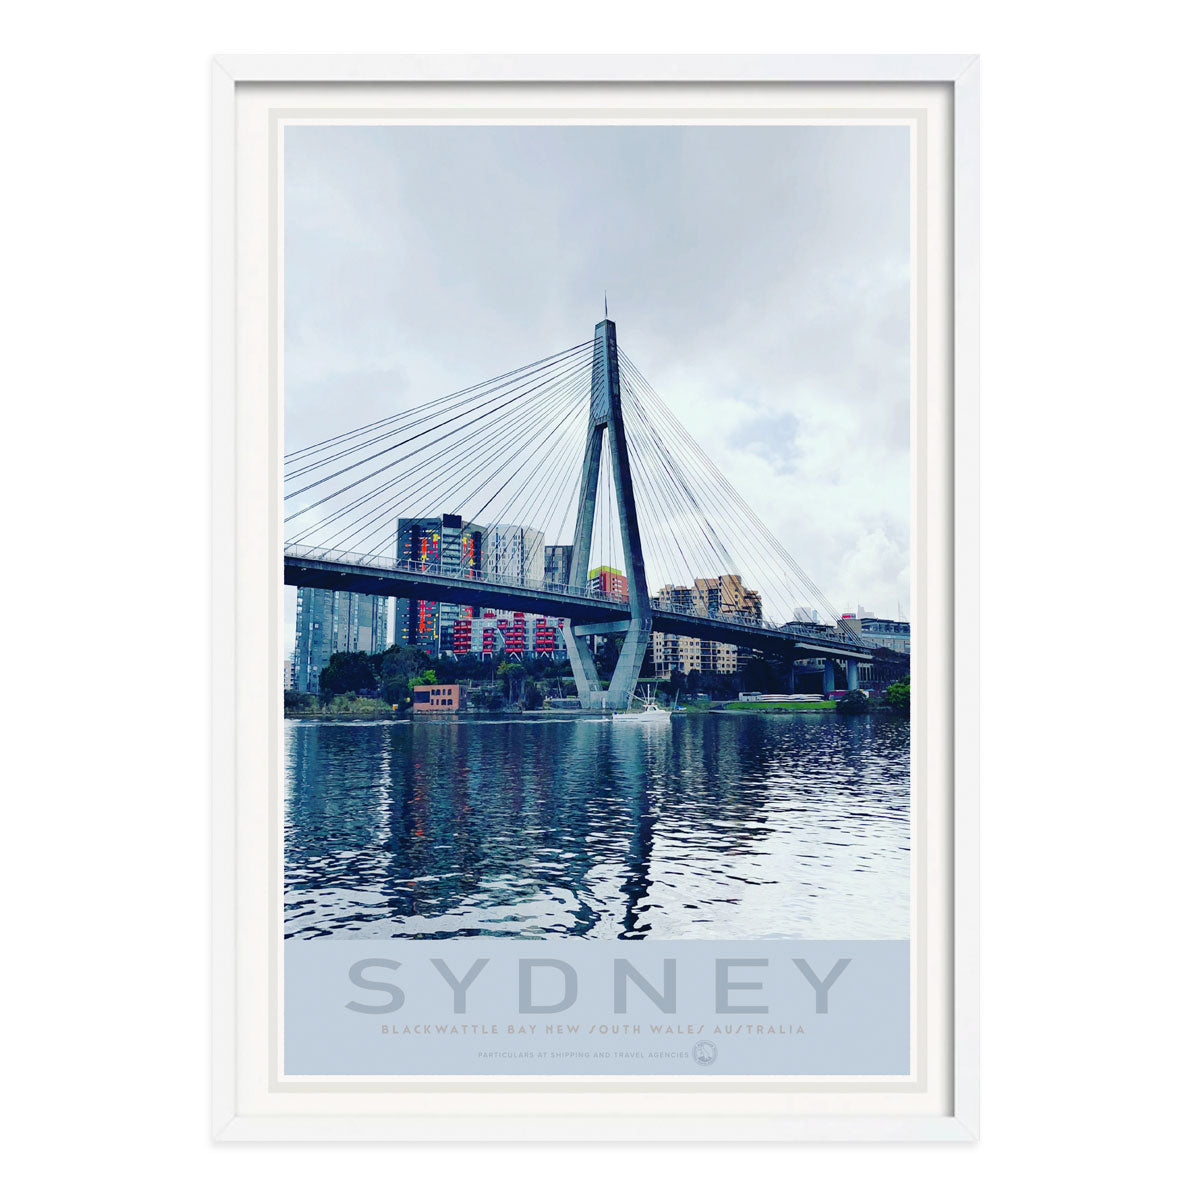 Sydney Australia vintage retro poster print in white frame from Places We Luv